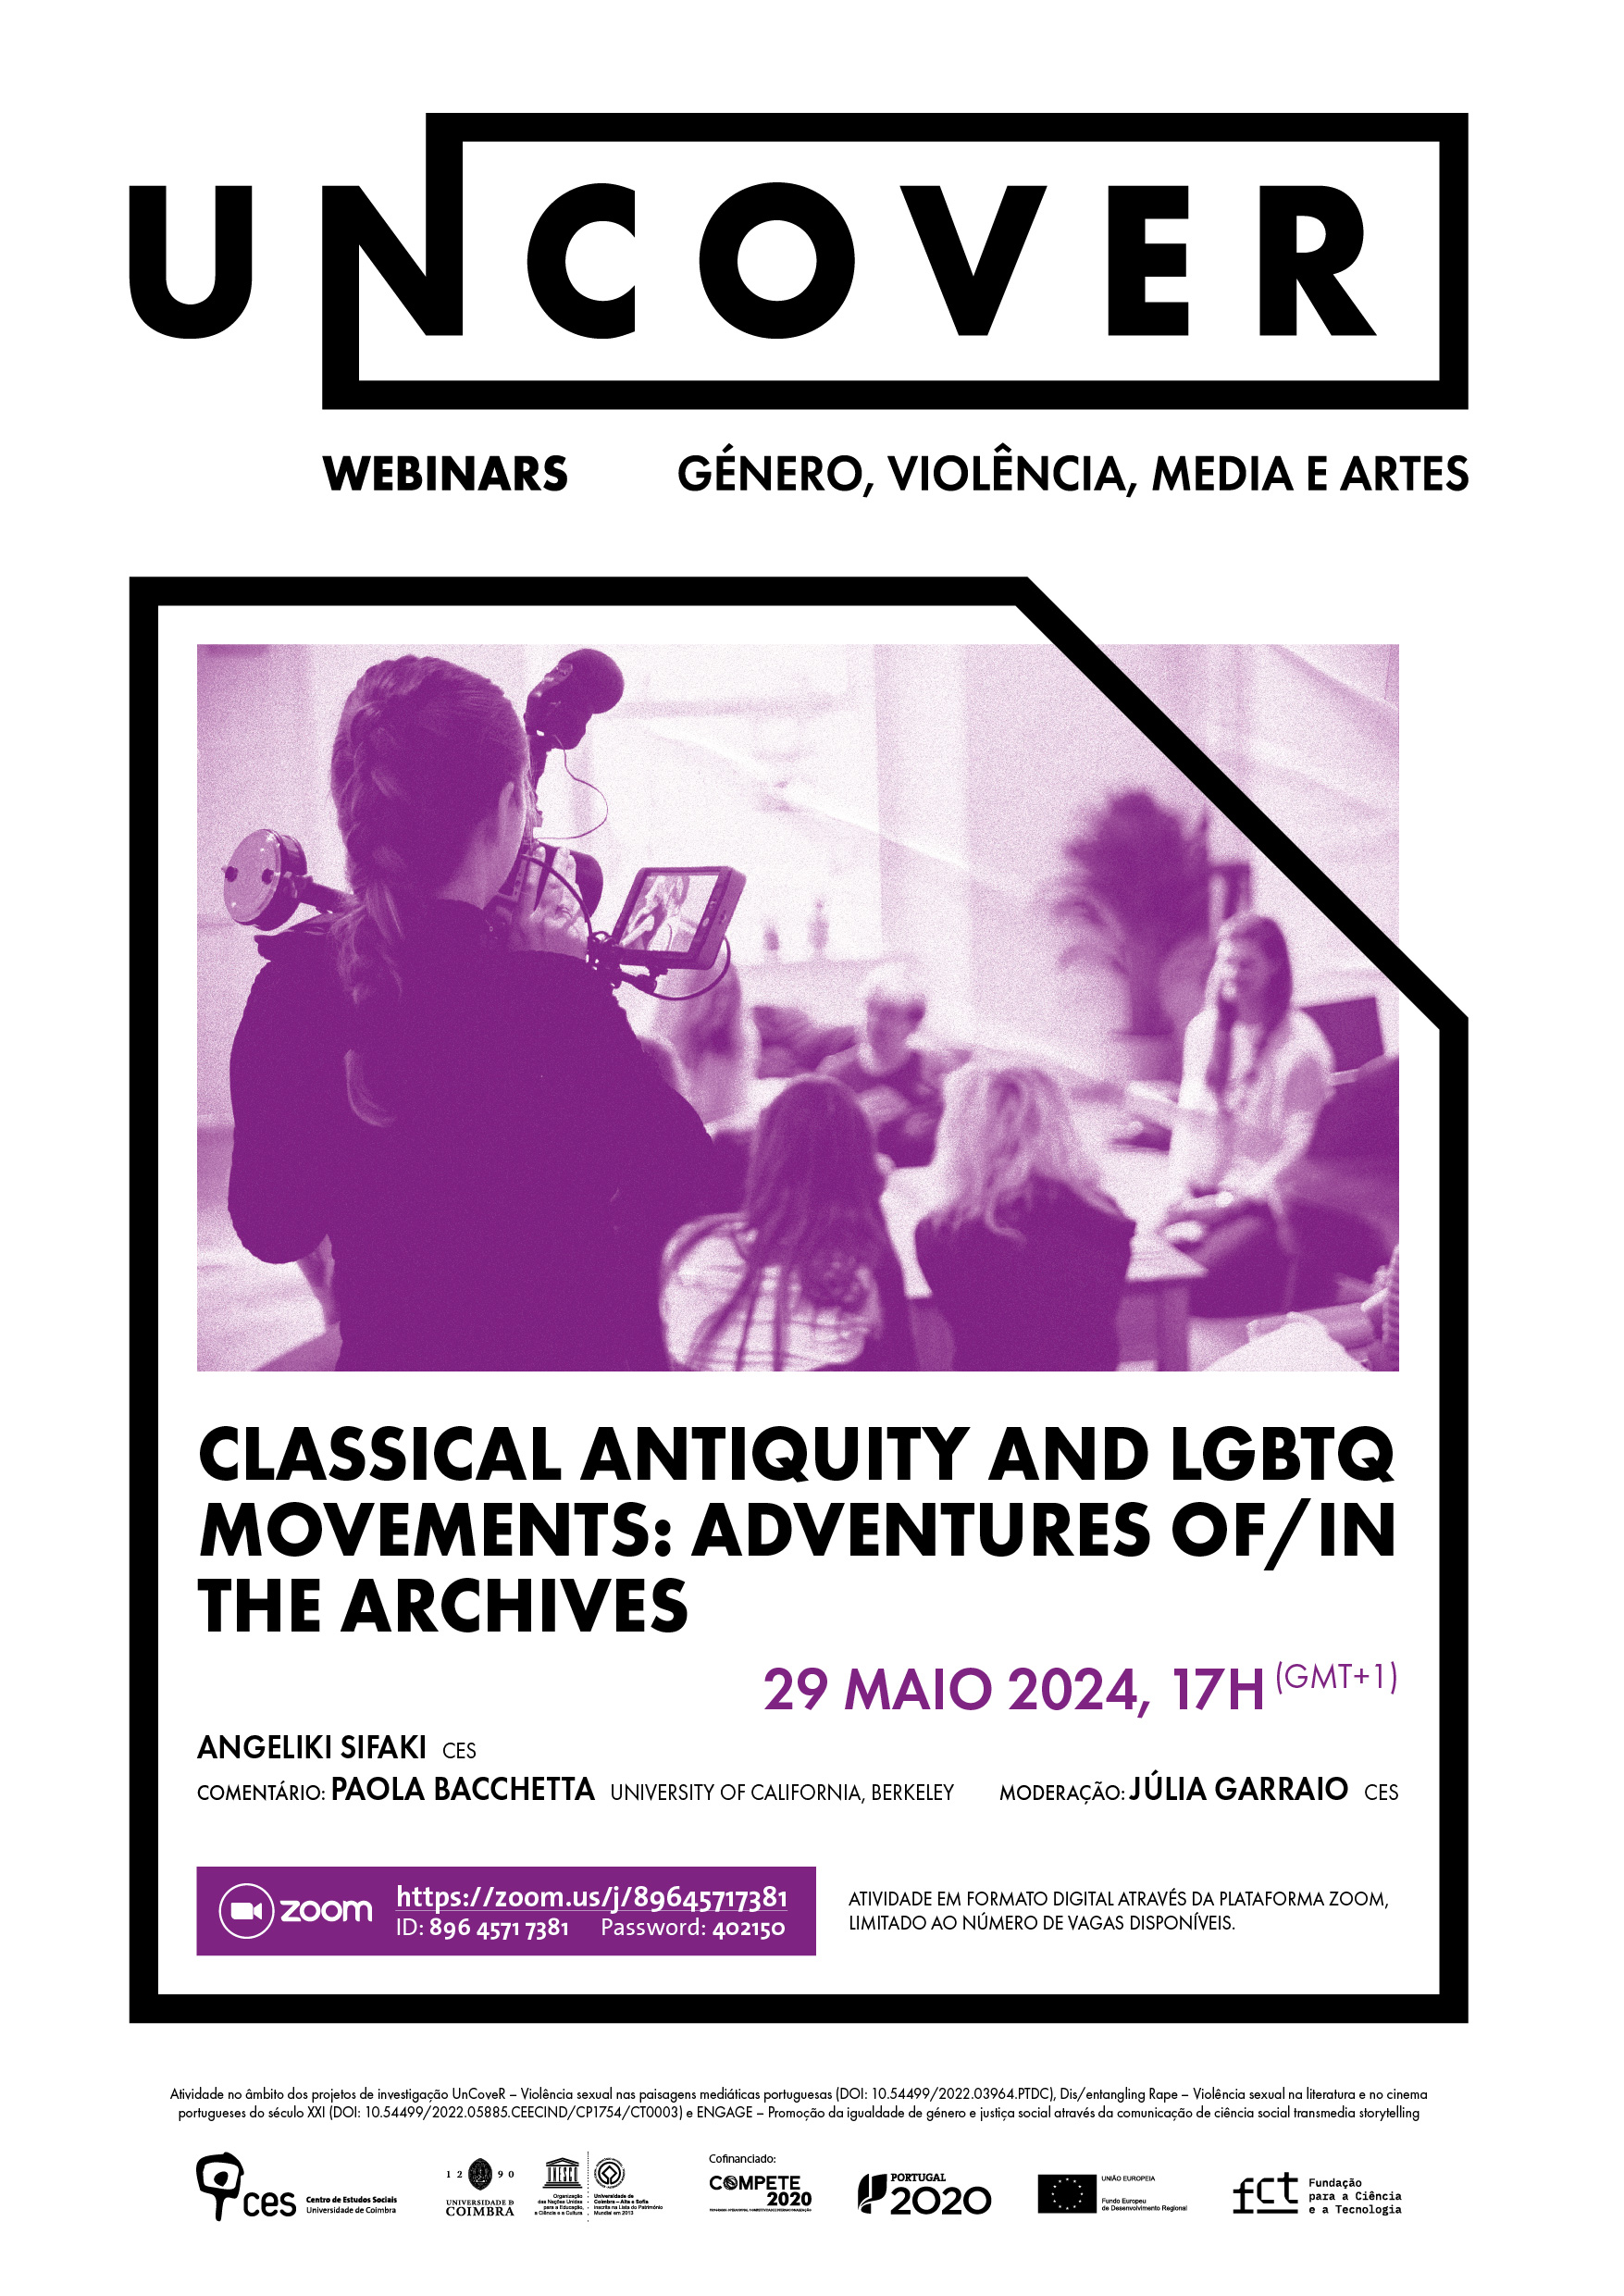 Classical Antiquity and LGBTQ Movements: Adventures of/in the Archives<span id="edit_45675"><script>$(function() { $('#edit_45675').load( "/myces/user/editobj.php?tipo=evento&id=45675" ); });</script></span>